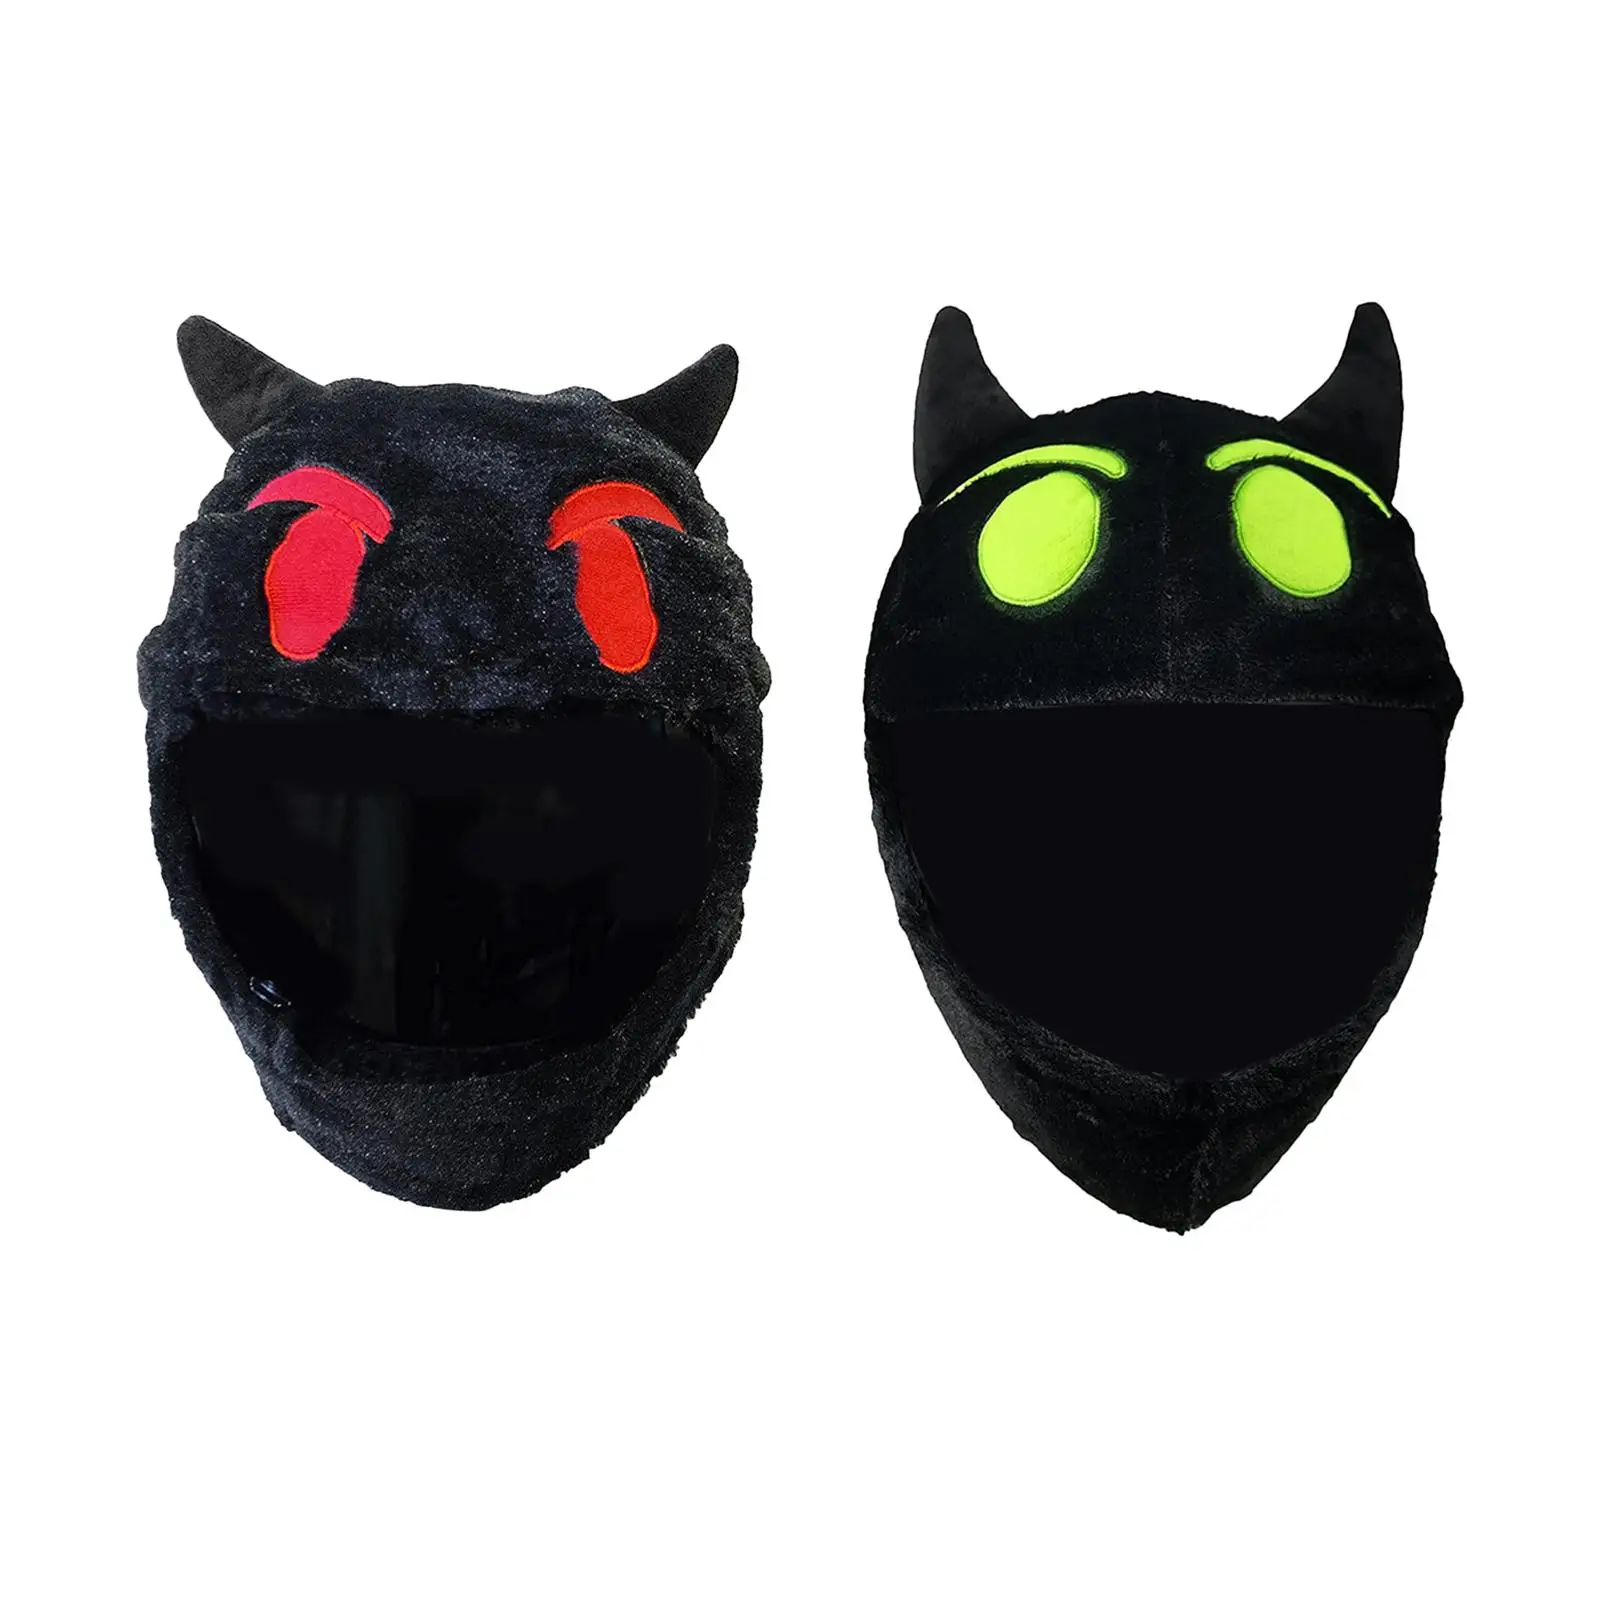 Devil Helmet Cover Plush Helmet Cover Cute Decoration Easy to Install Eye Catching Style Gifts Increase Riding Fun